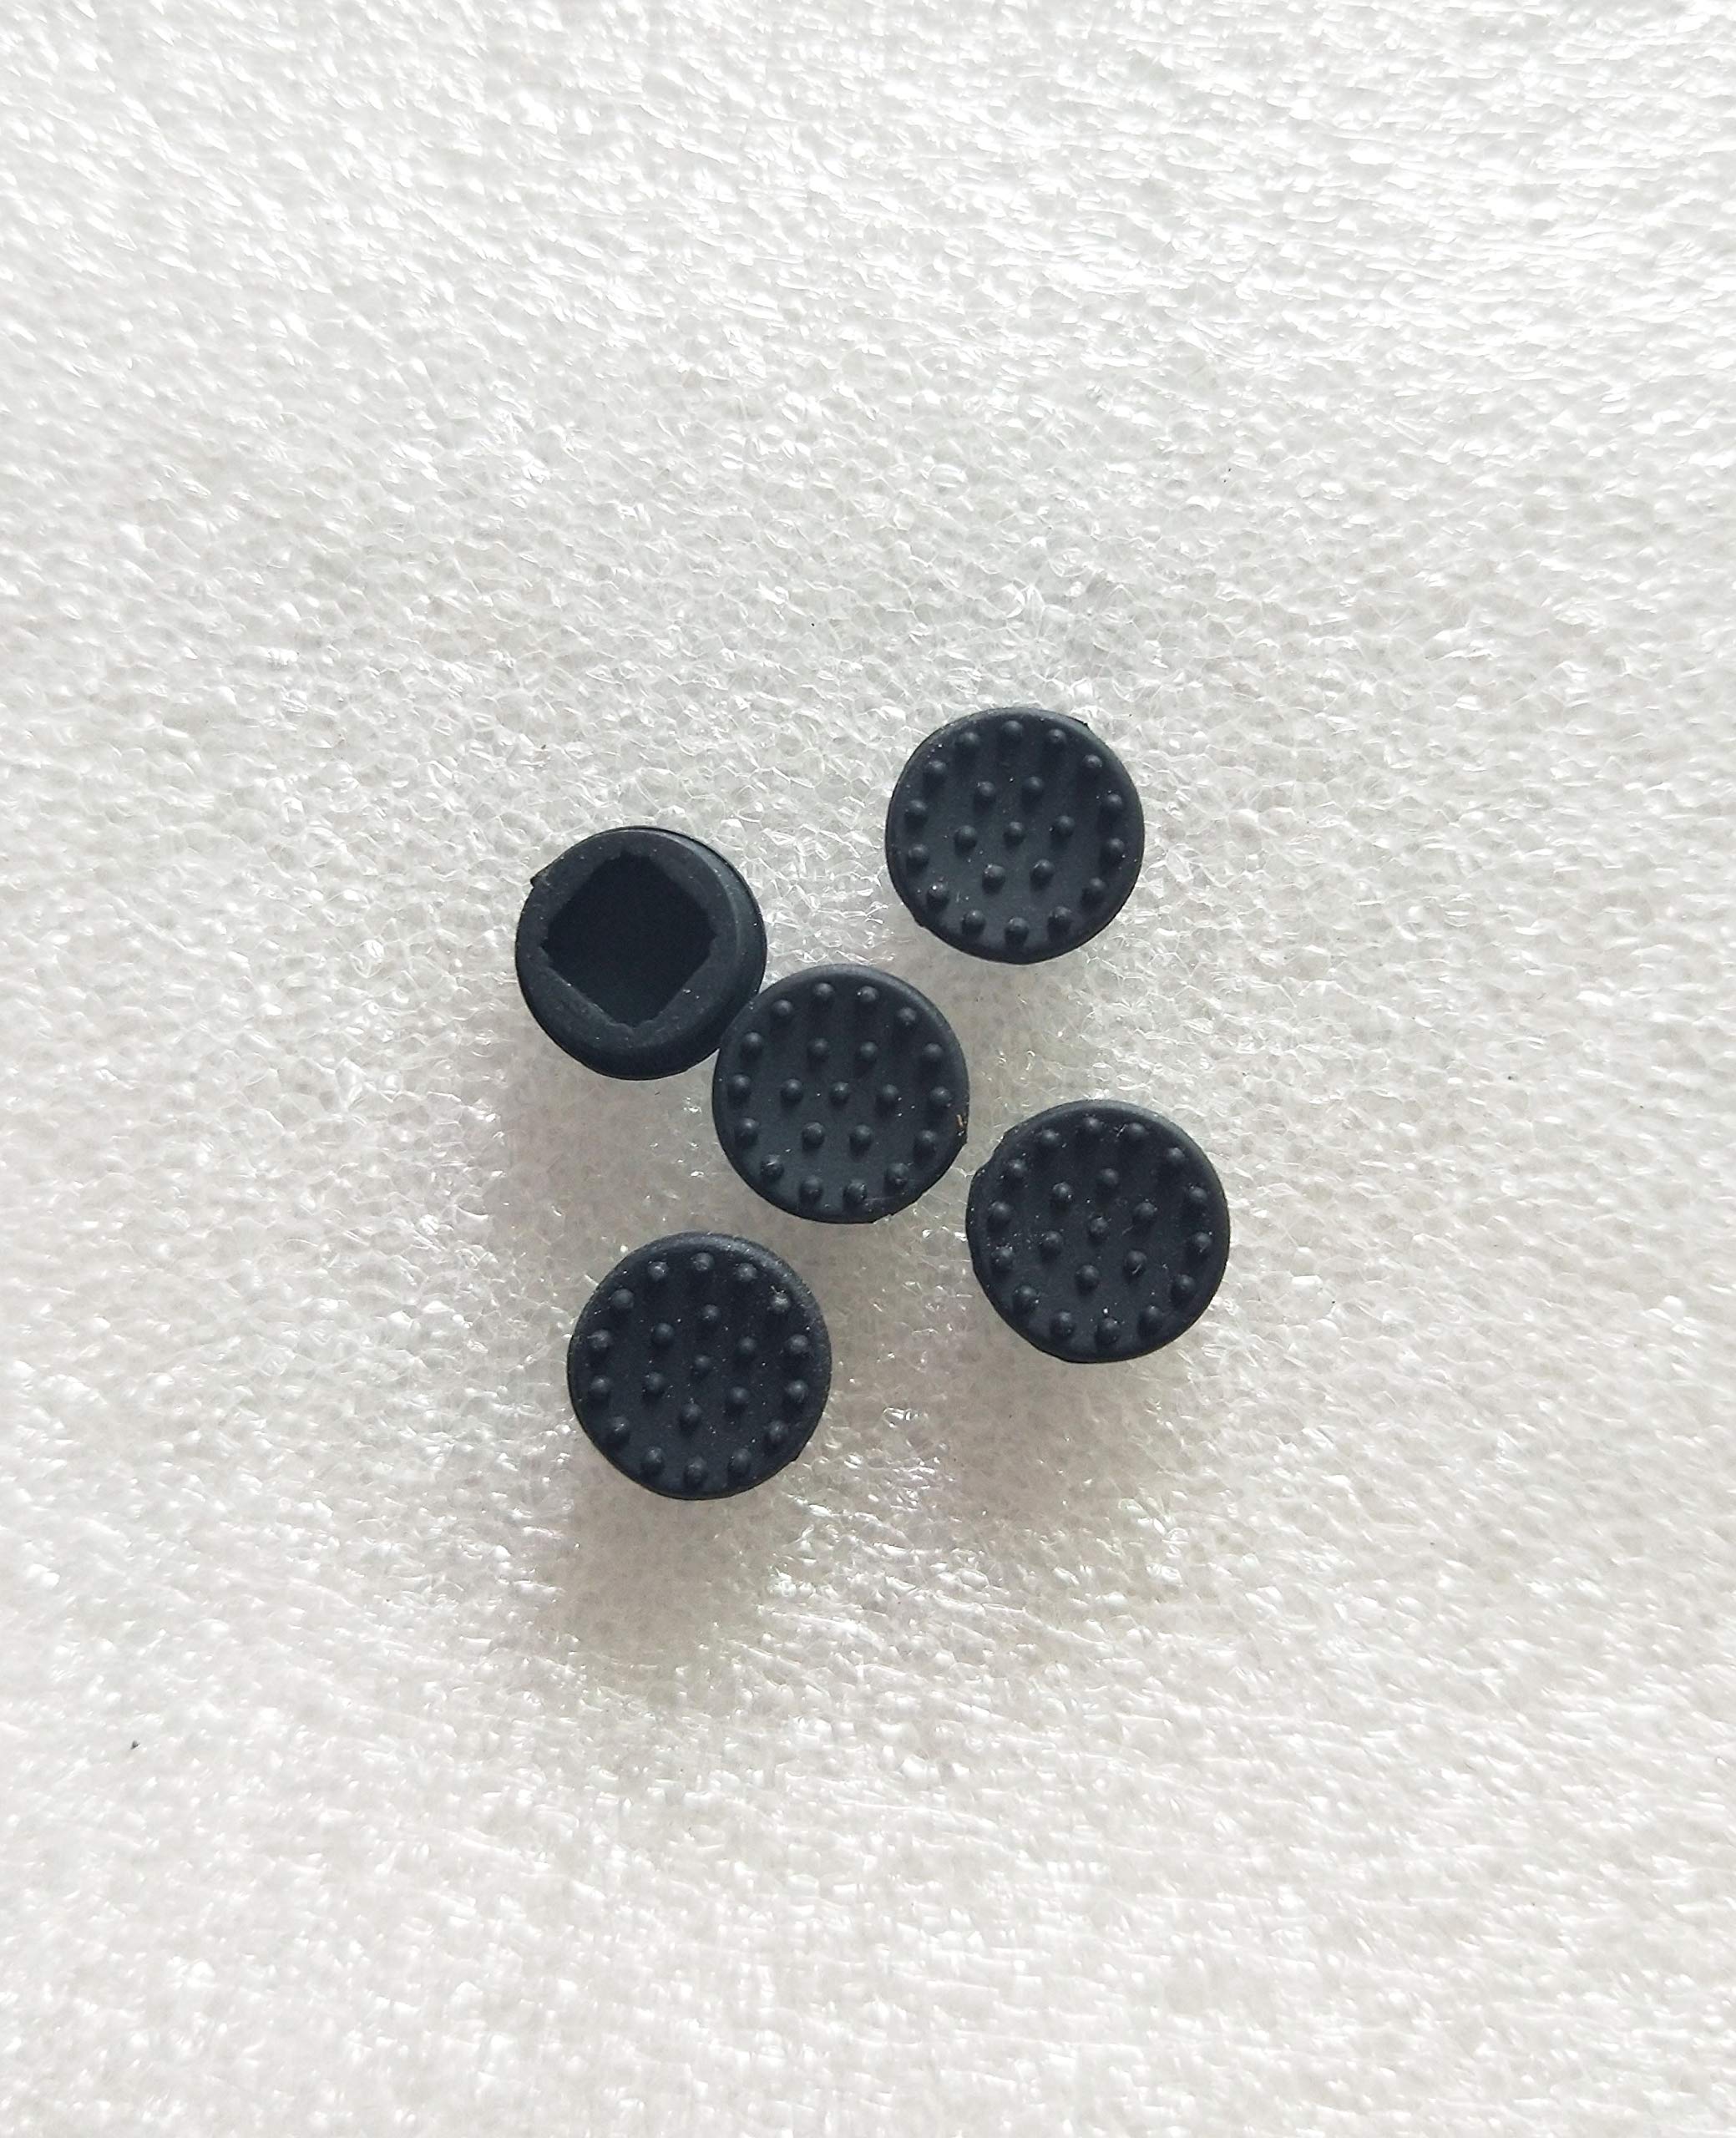 5pcs New Compatible with HP EliteBook 725 820 840 850 G1 G2 Keyboard Mouse Stick TRACKPOINT Cap